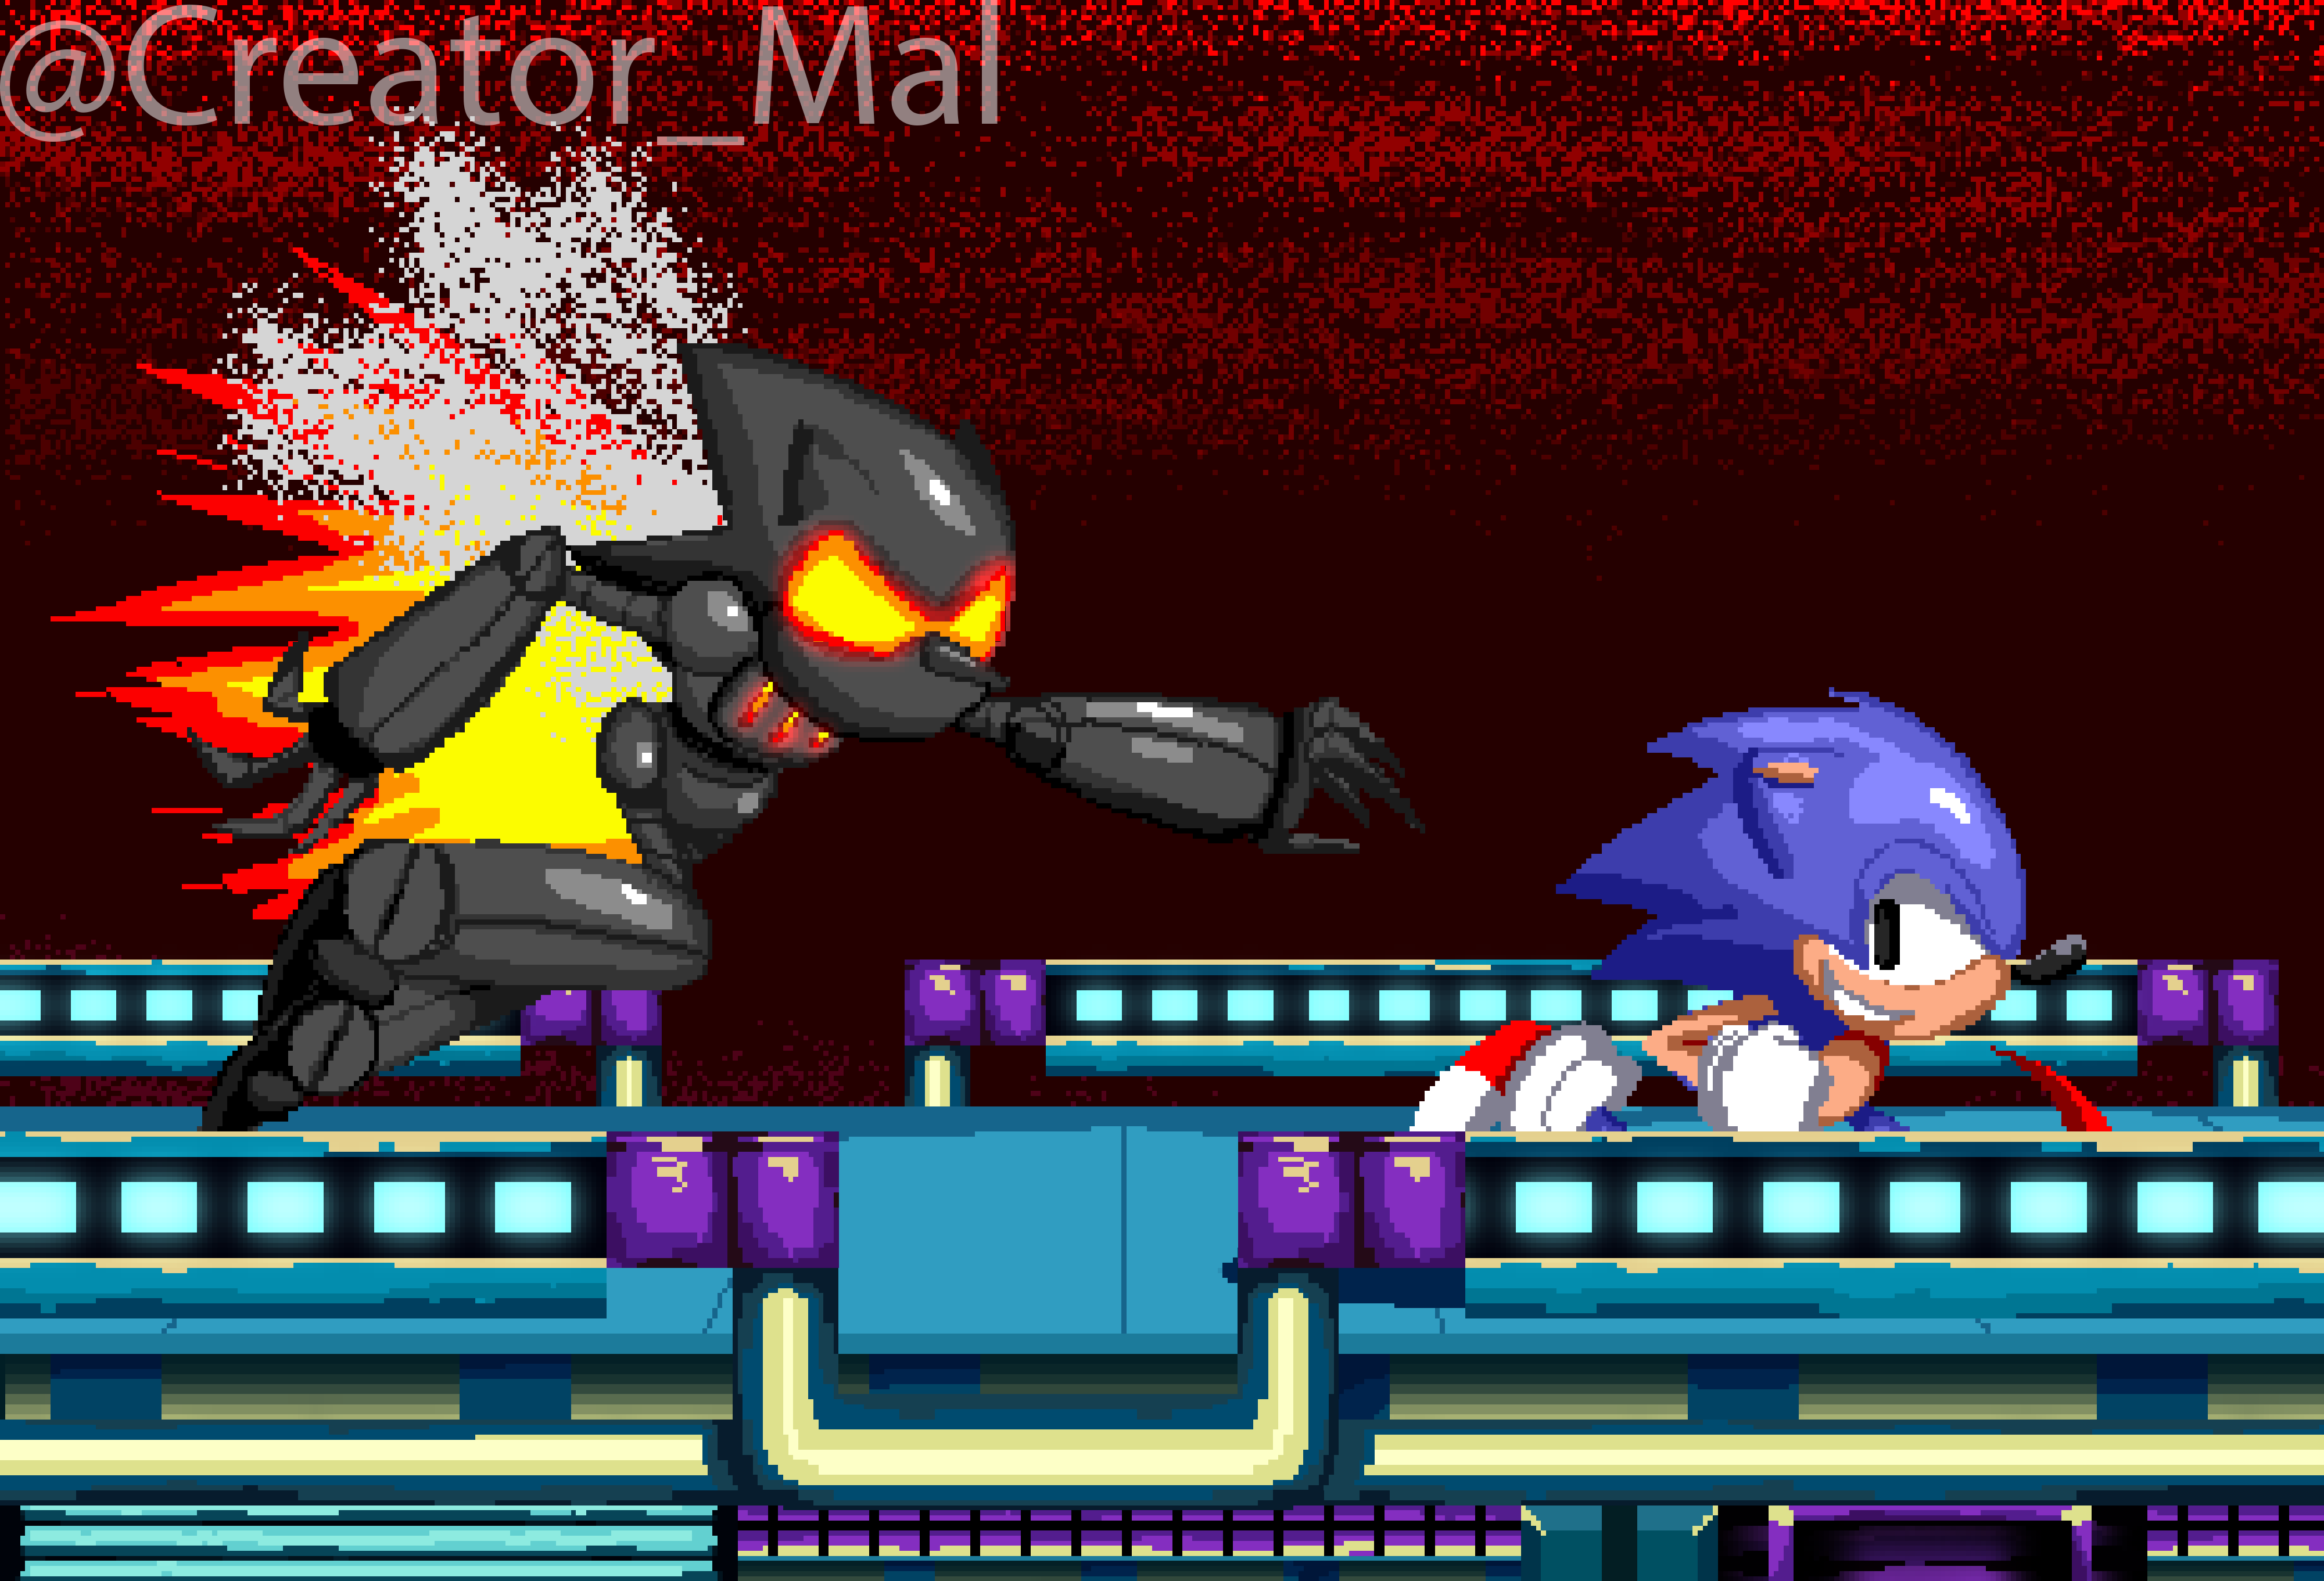 Metal Sonic, Furnace, and Chaos Sonic Meme by Brokenhollowglass on